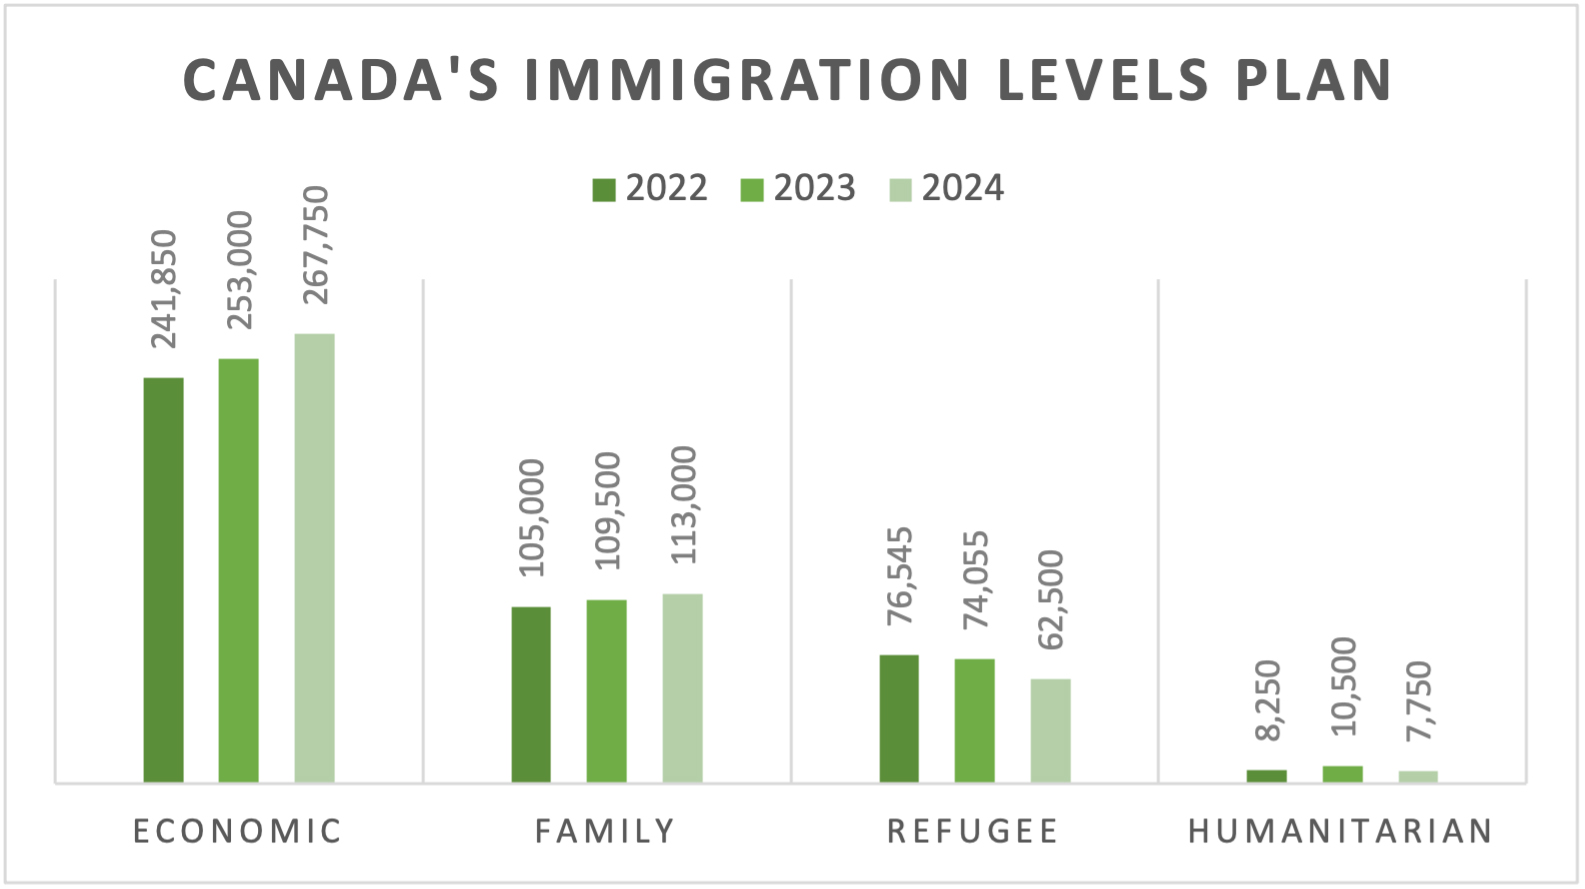 Bar graph showing the increasing amounts of immigrants Canada plans to welcome into the country over the years.